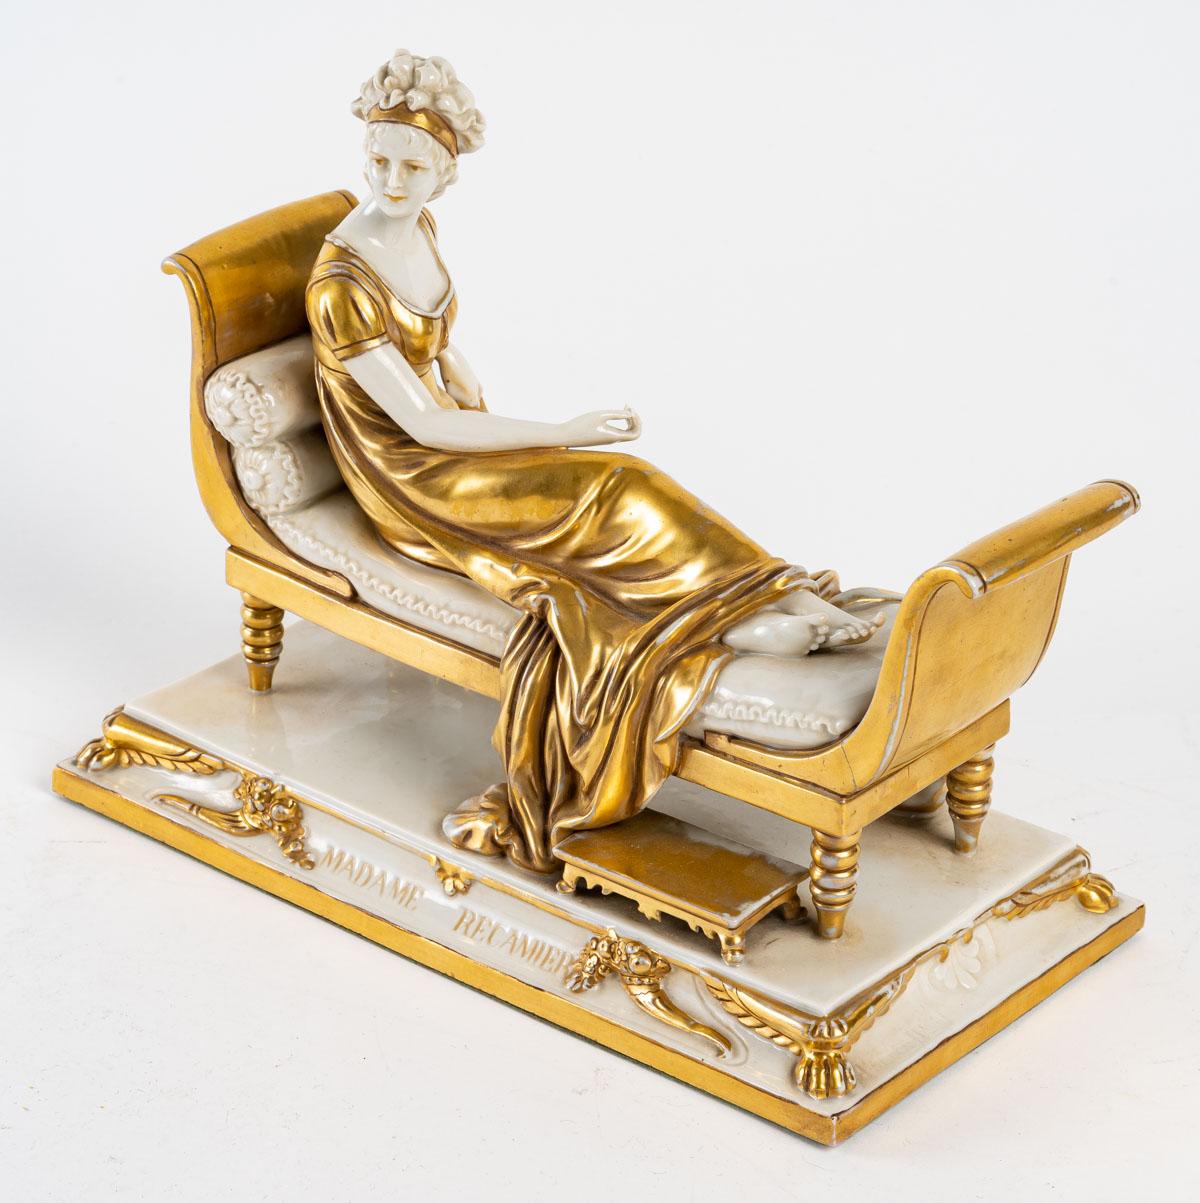 French Madame Récamier in White and Gold Porcelain